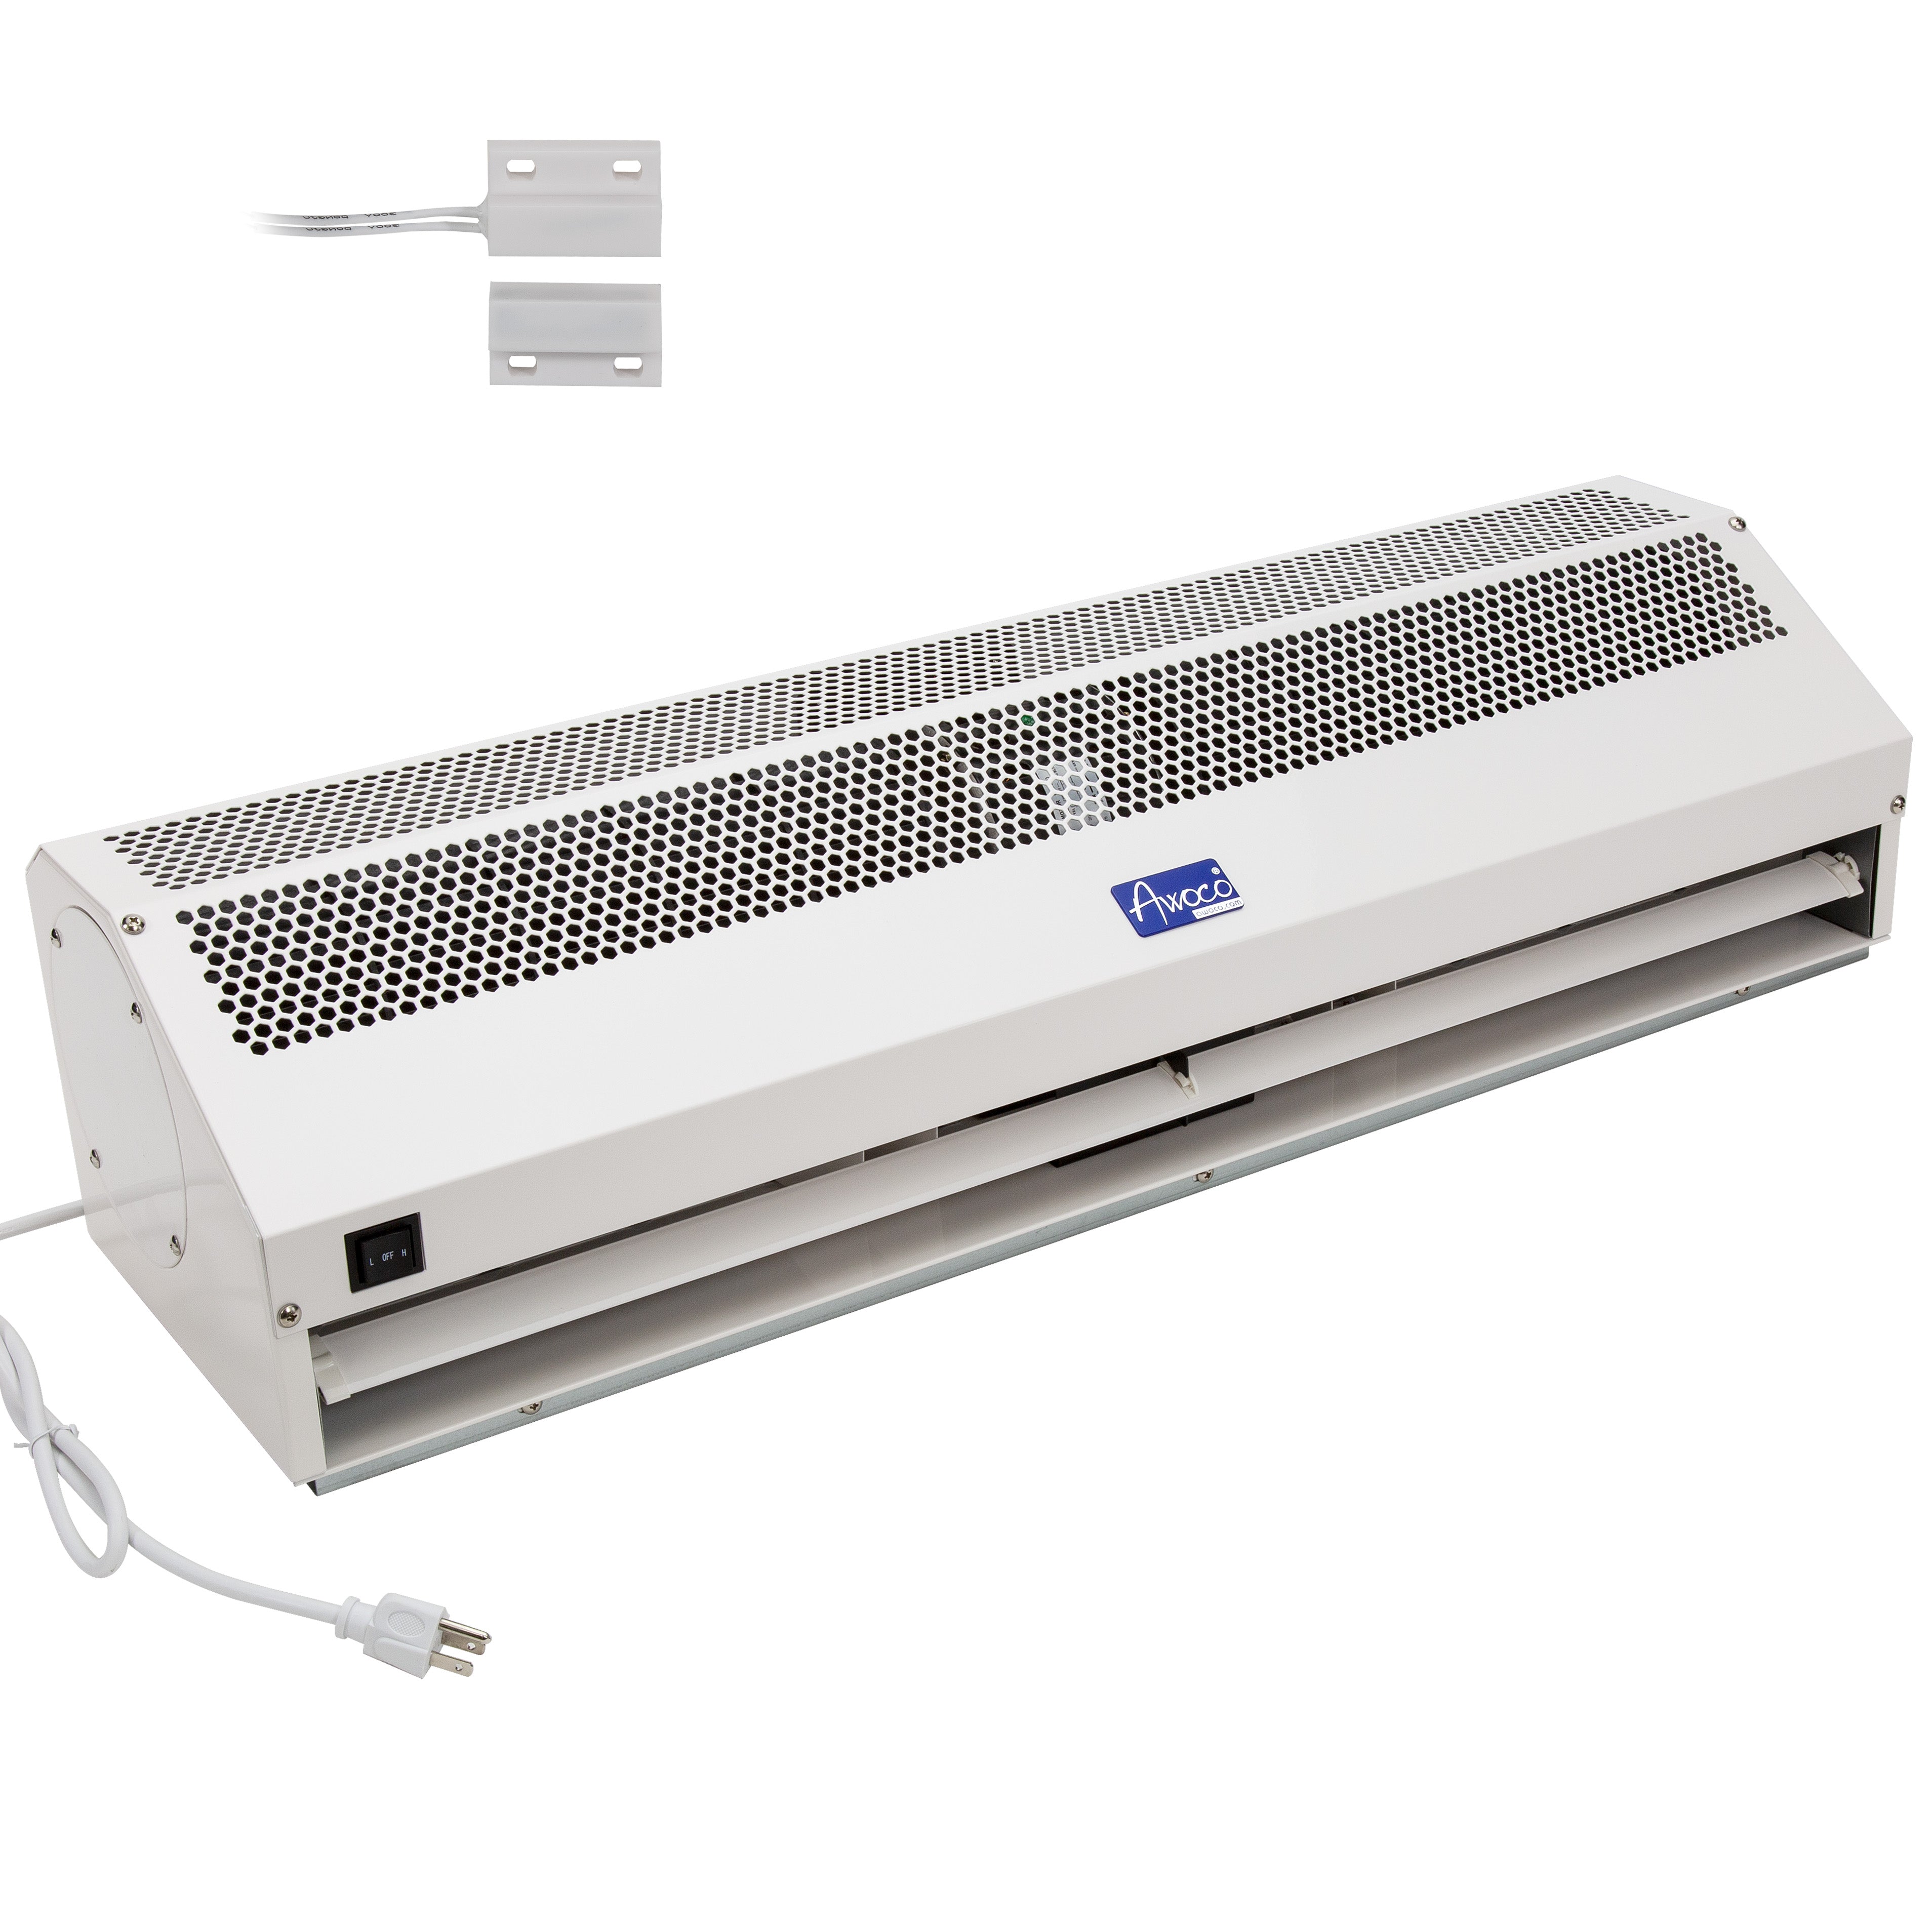 Awoco 42” Super Power 2 Speeds 1350 CFM Commercial Indoor Air Curtain, UL Certified, 120V Unheated with an Easy-Install Magnetic Switch, 3 Year Warranty